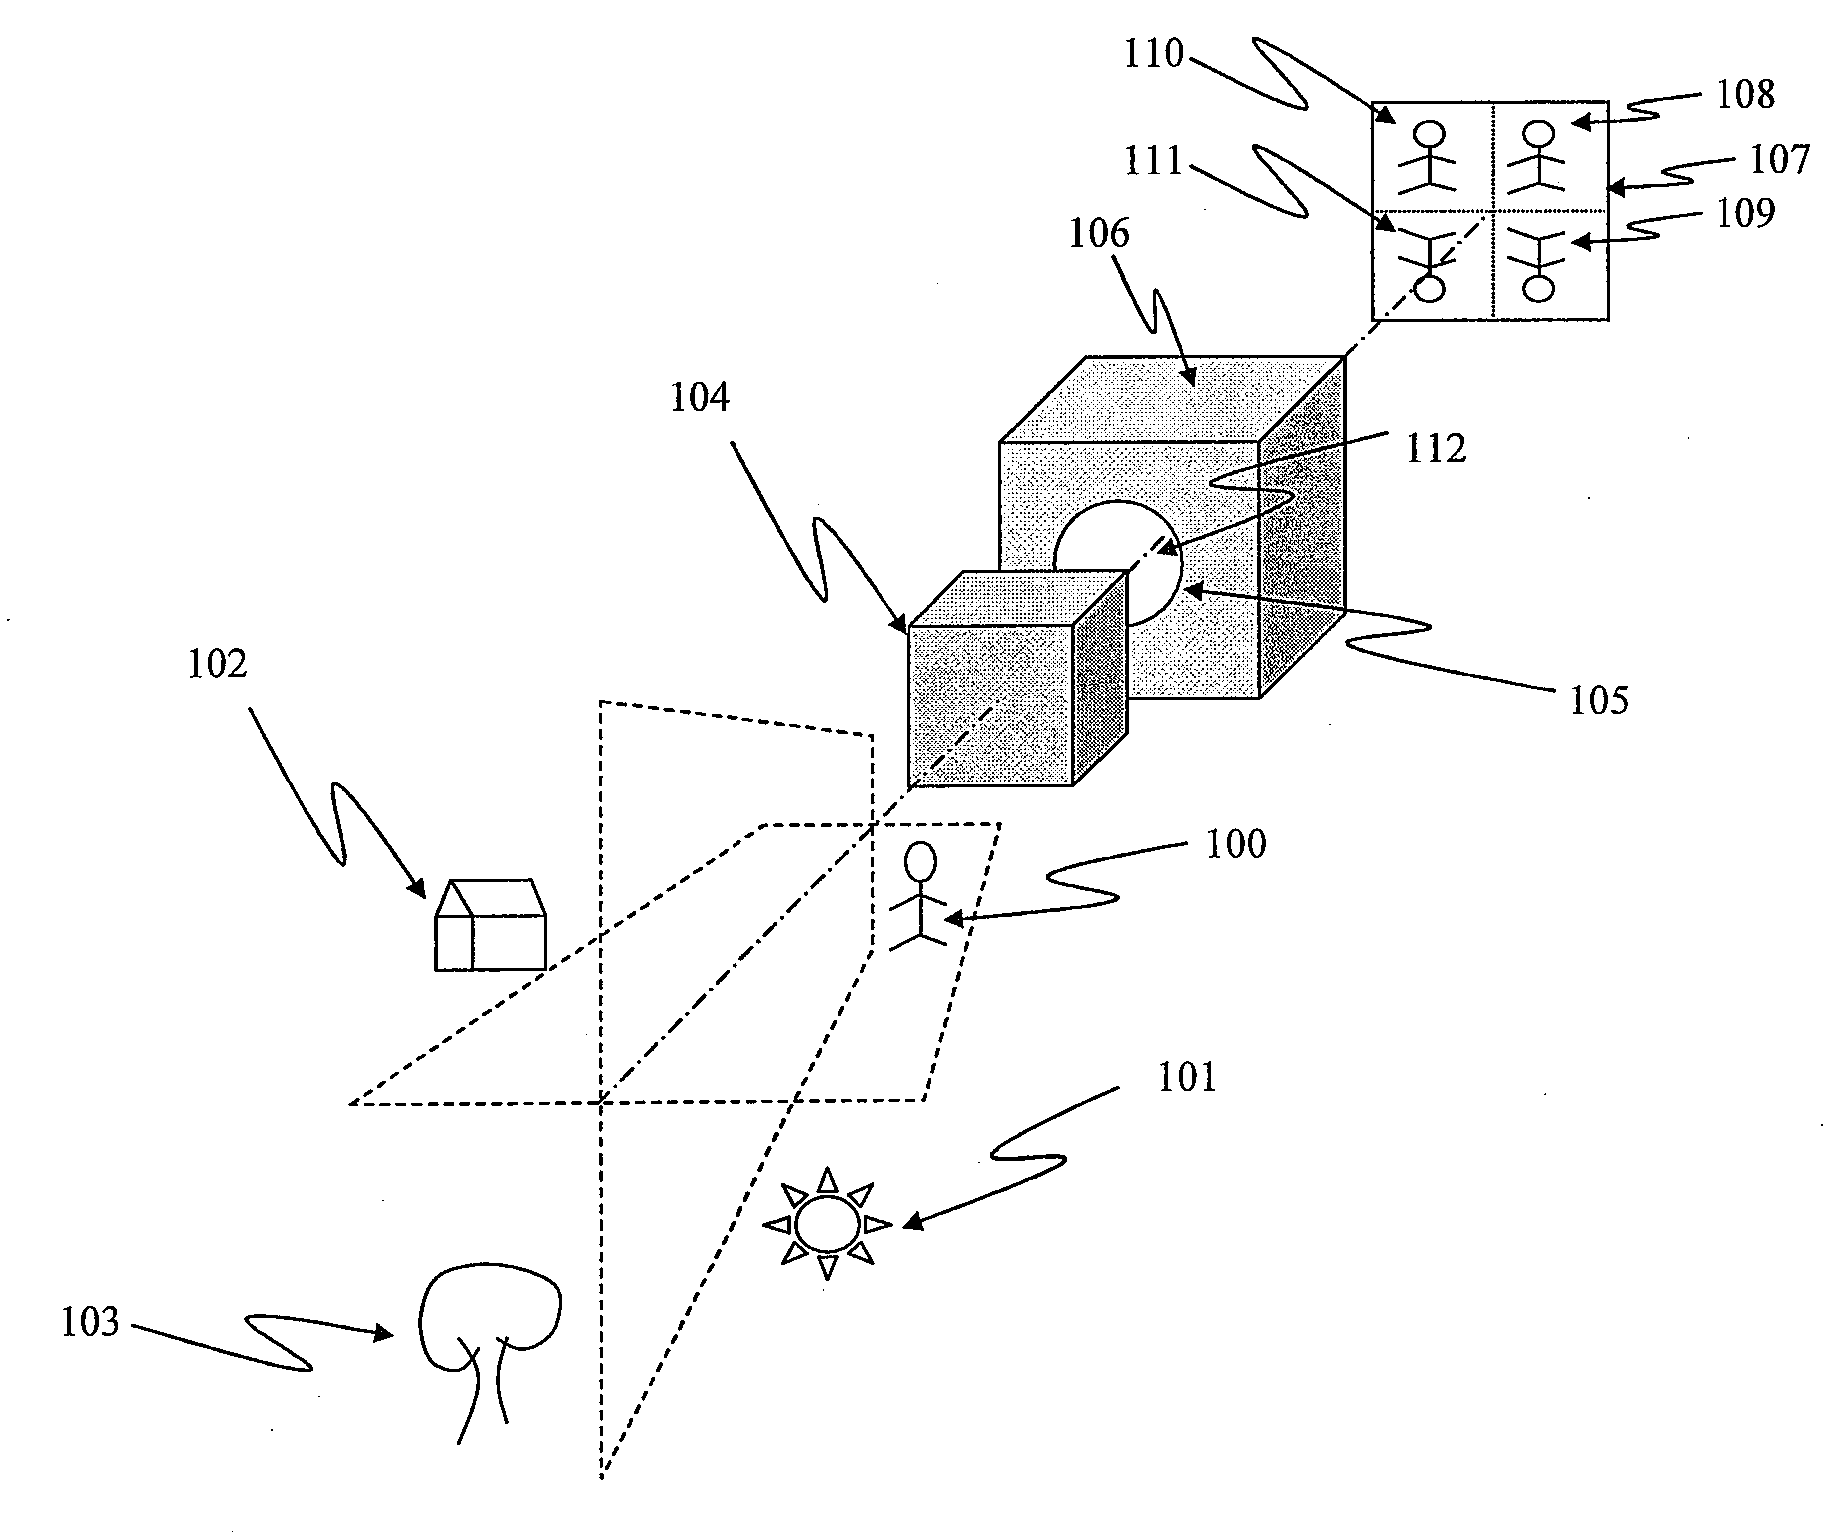 Apparatus and method for simultaneously acquiring multiple images with a given camera